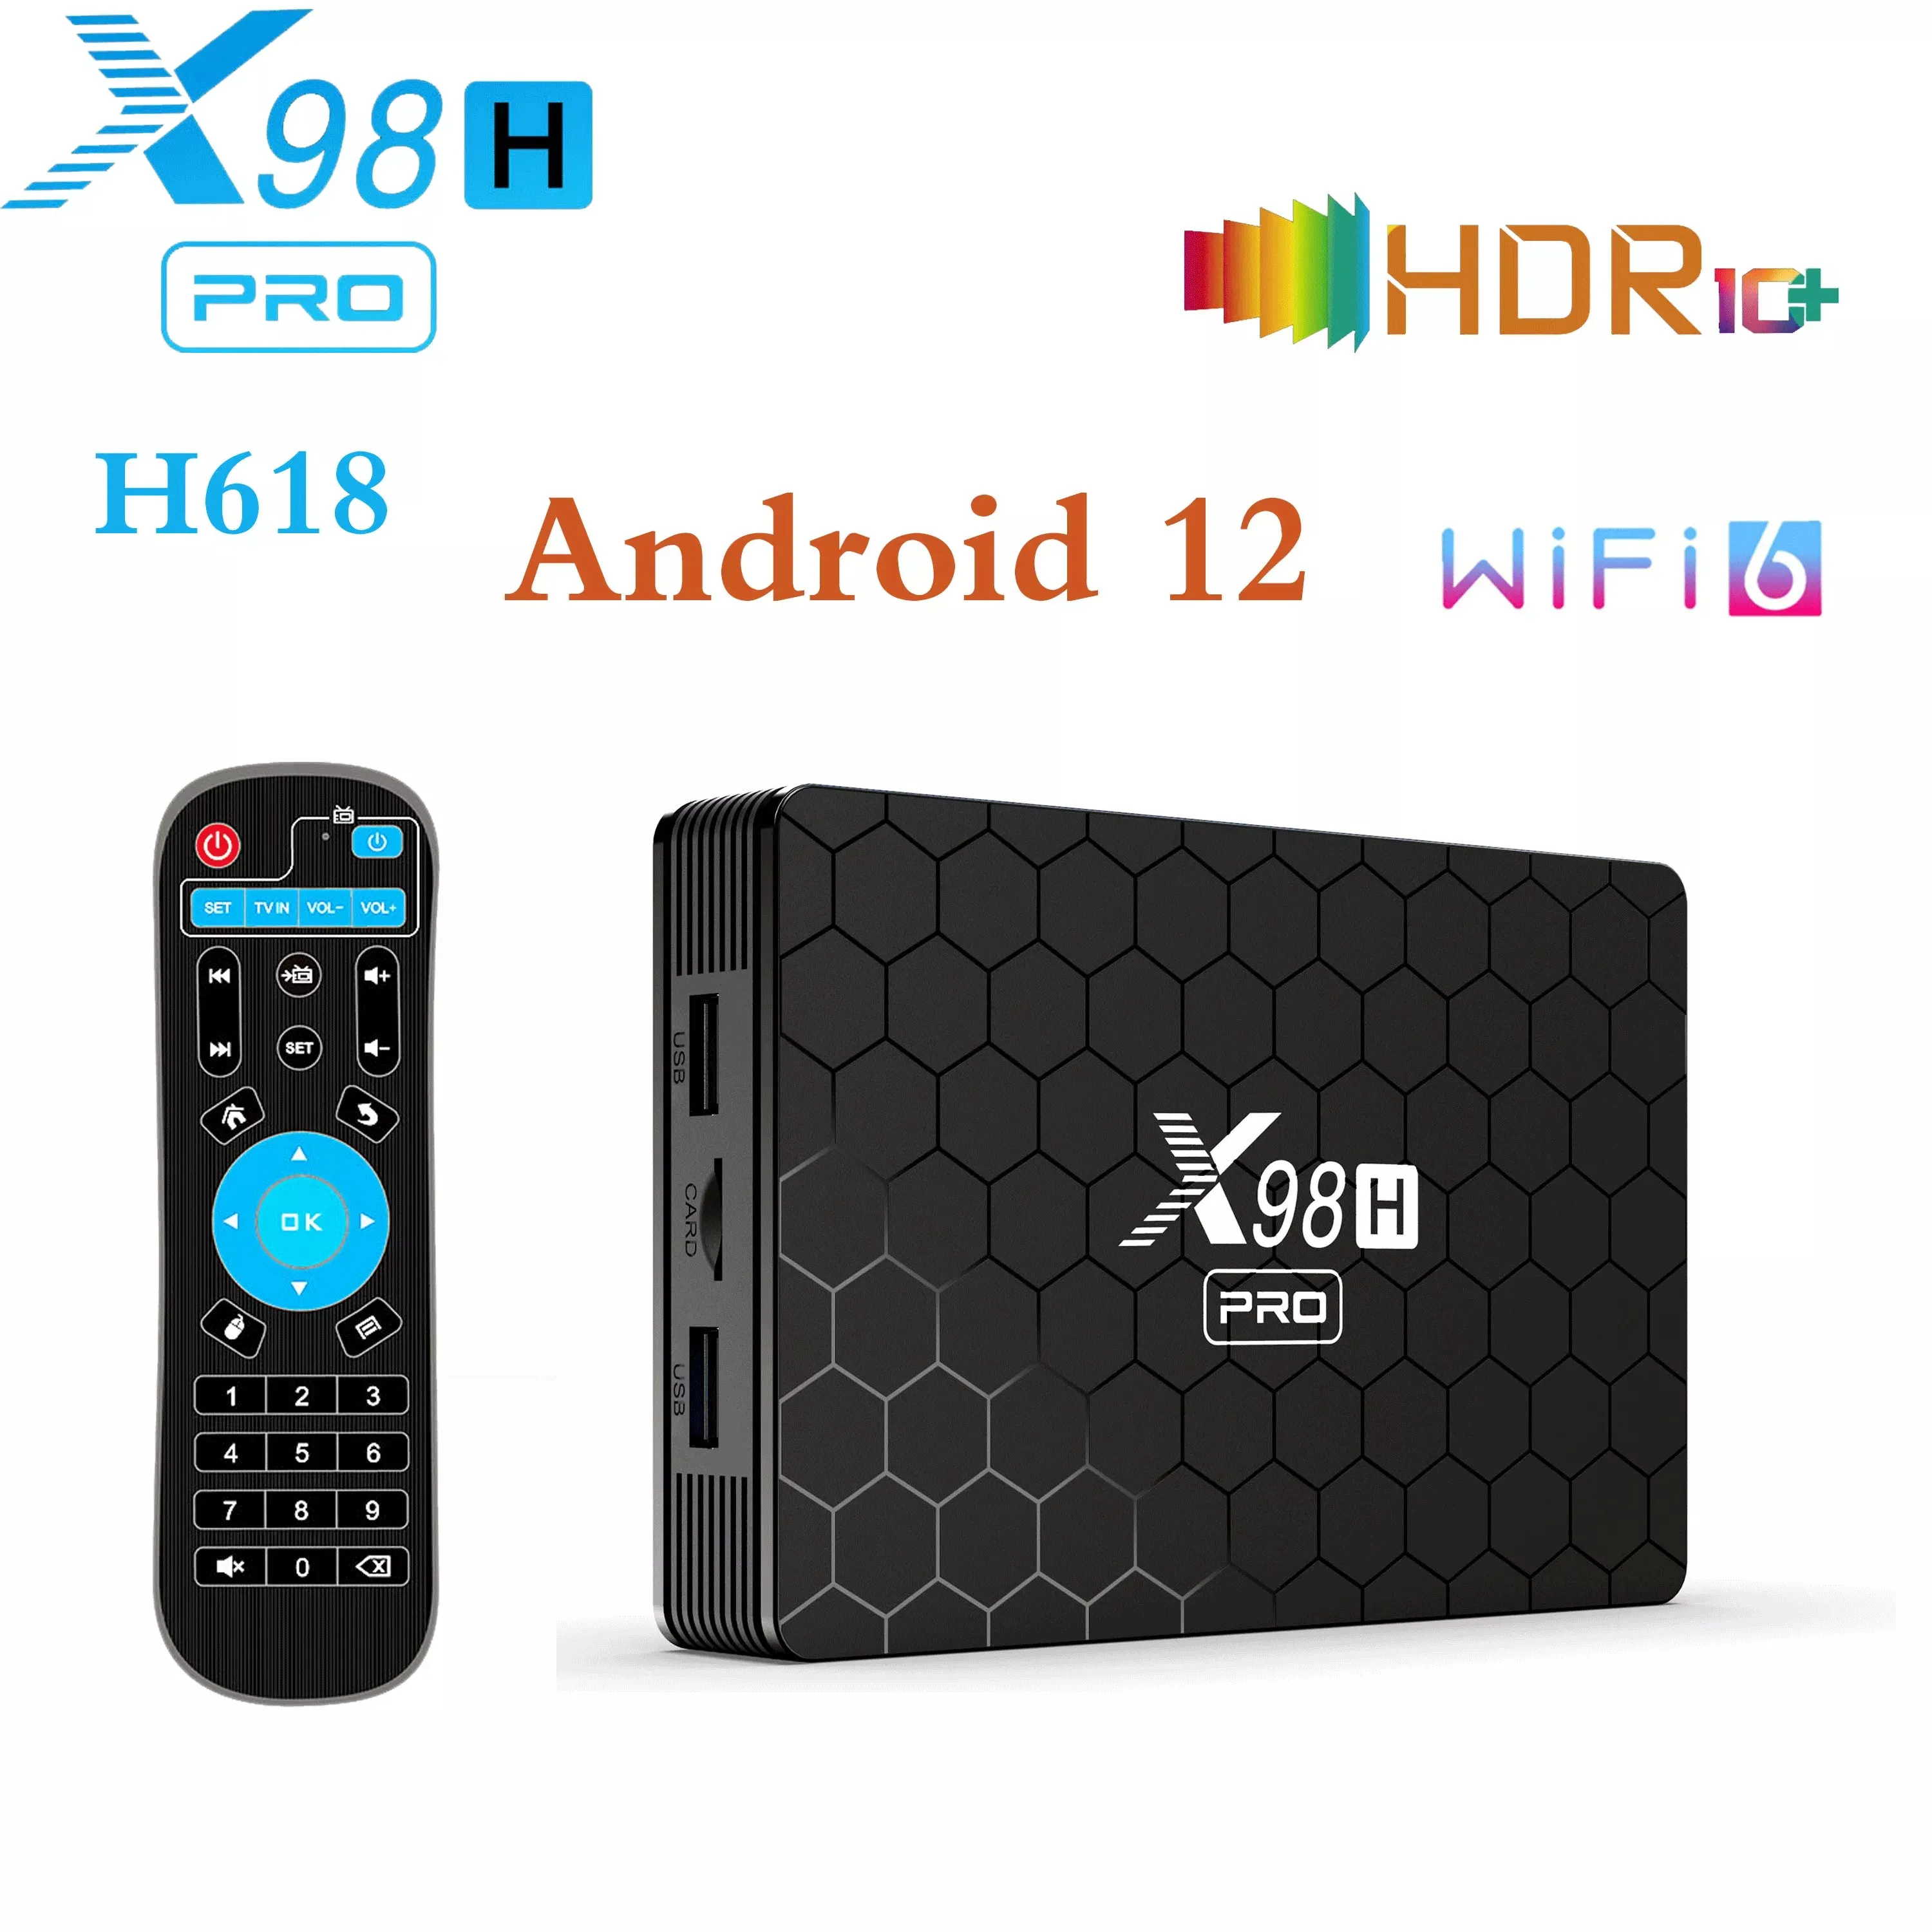 X98H pro android box! 4gb RAM, 32gb Storage, Android 12, Bluetooth, 2.4GHz, 5GHz